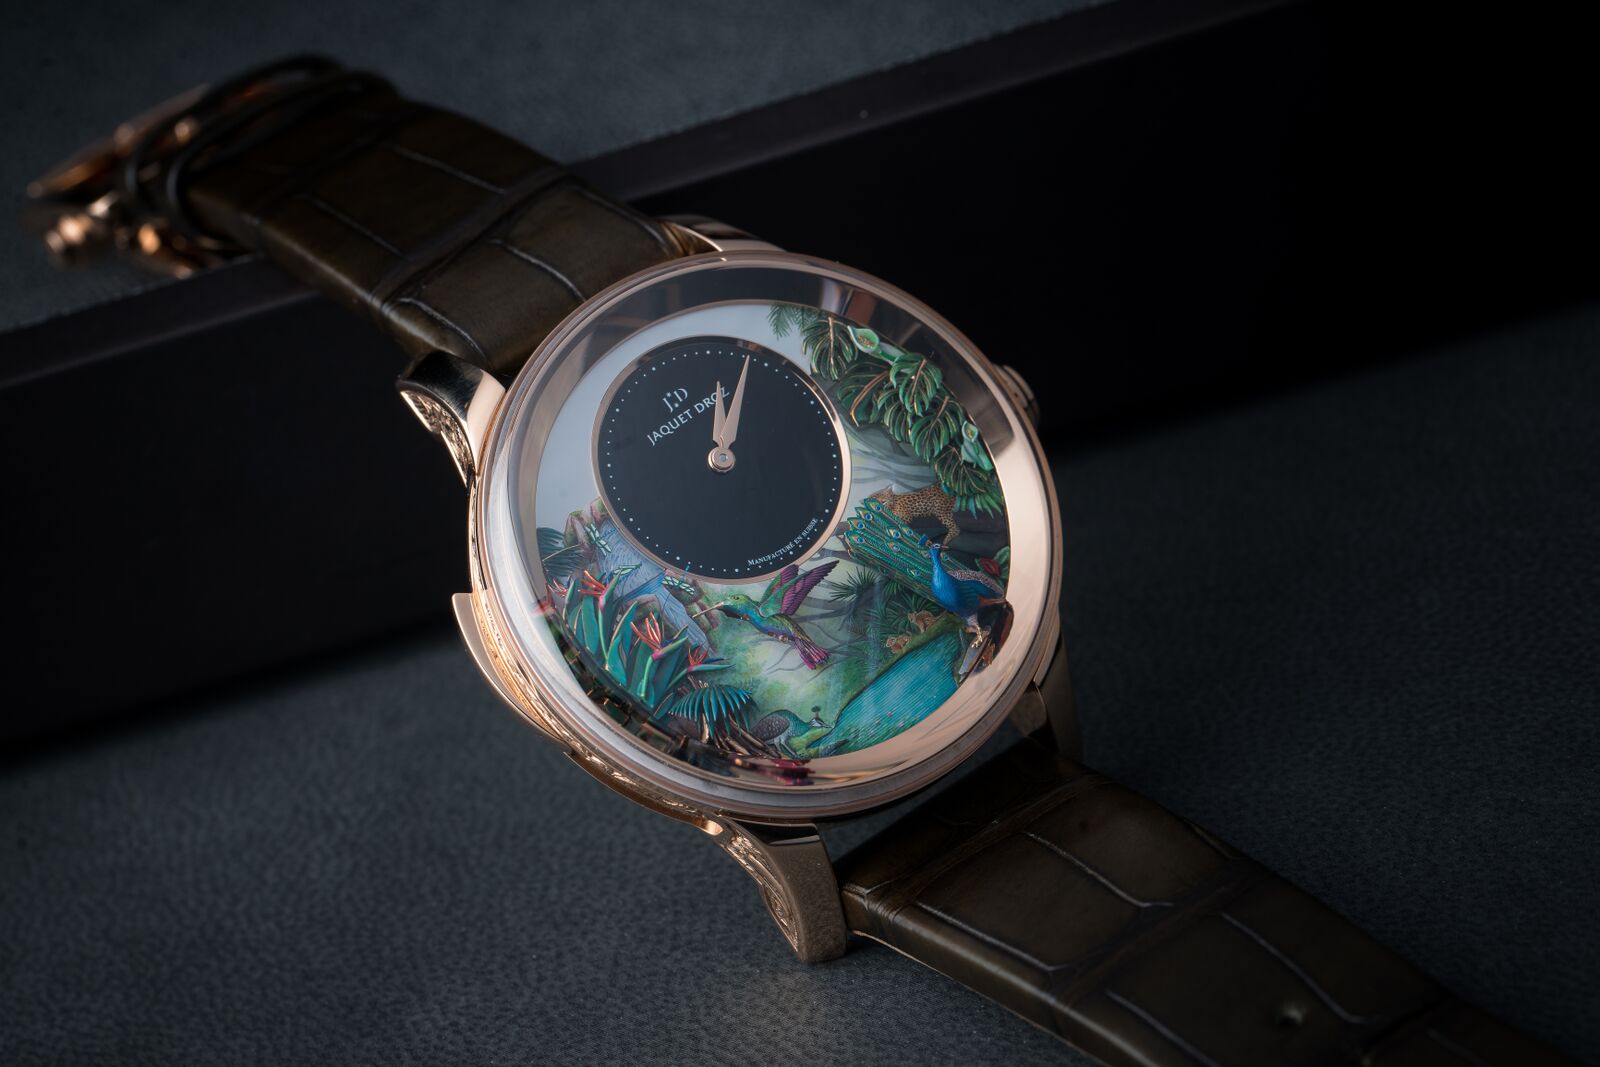 Enter A Mechanical Paradise With The Jaquet Droz Tropical Bird Repeater